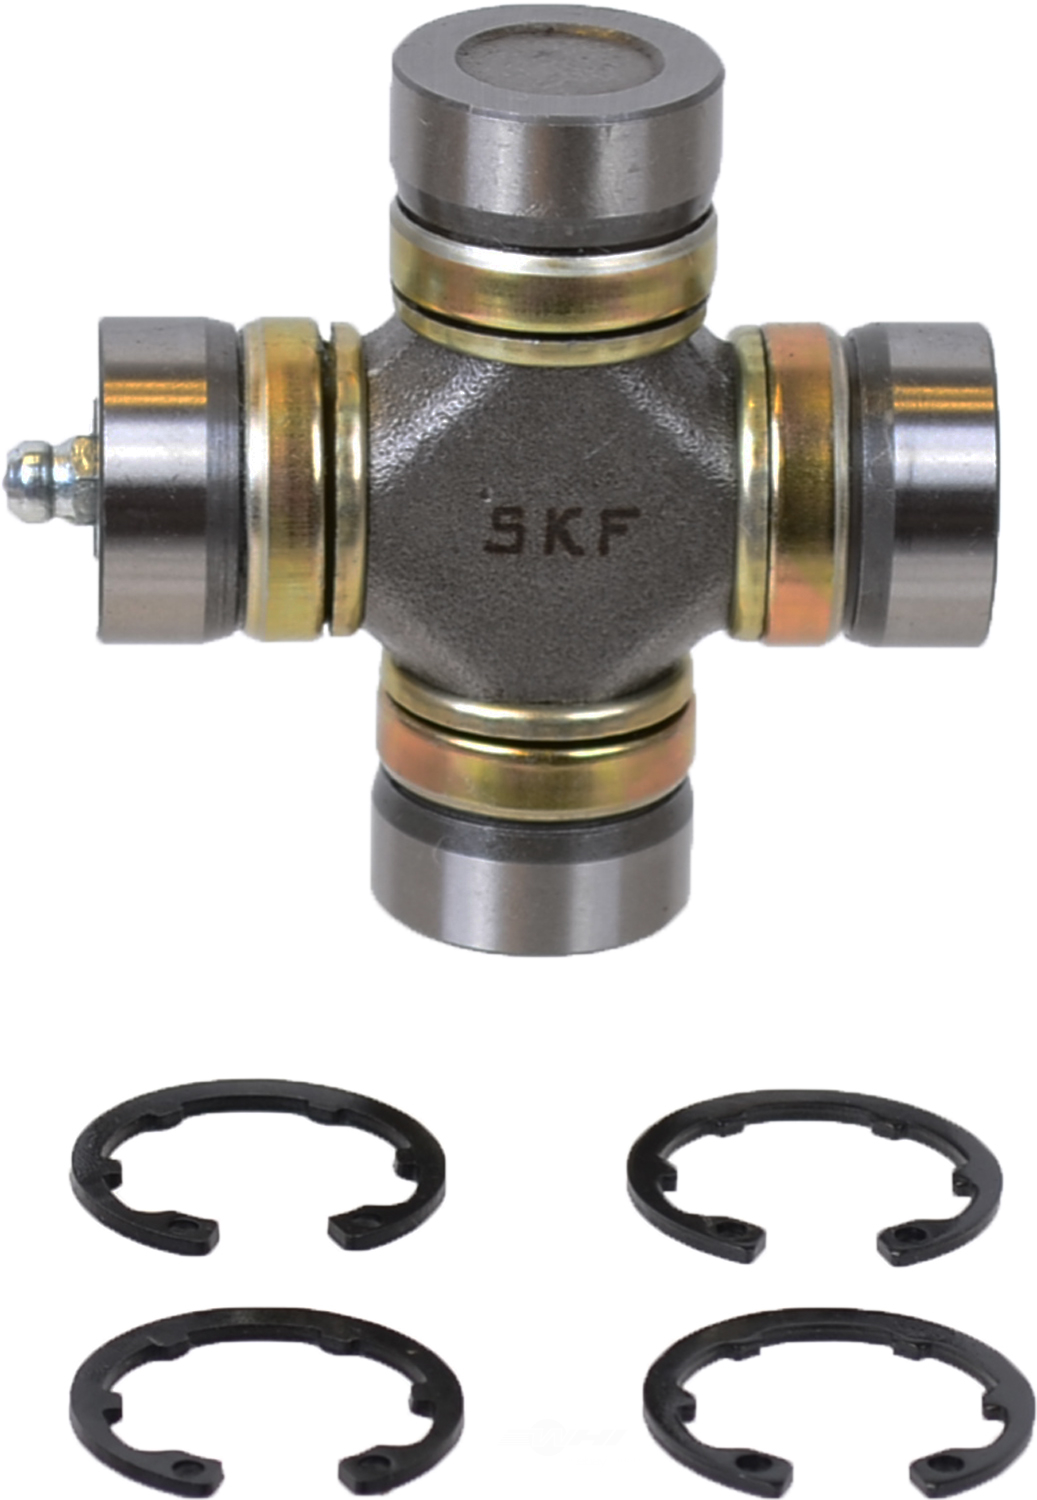 SKF (CHICAGO RAWHIDE) - Universal Joint (Rear Shaft Front Joint) - SKF UJ408